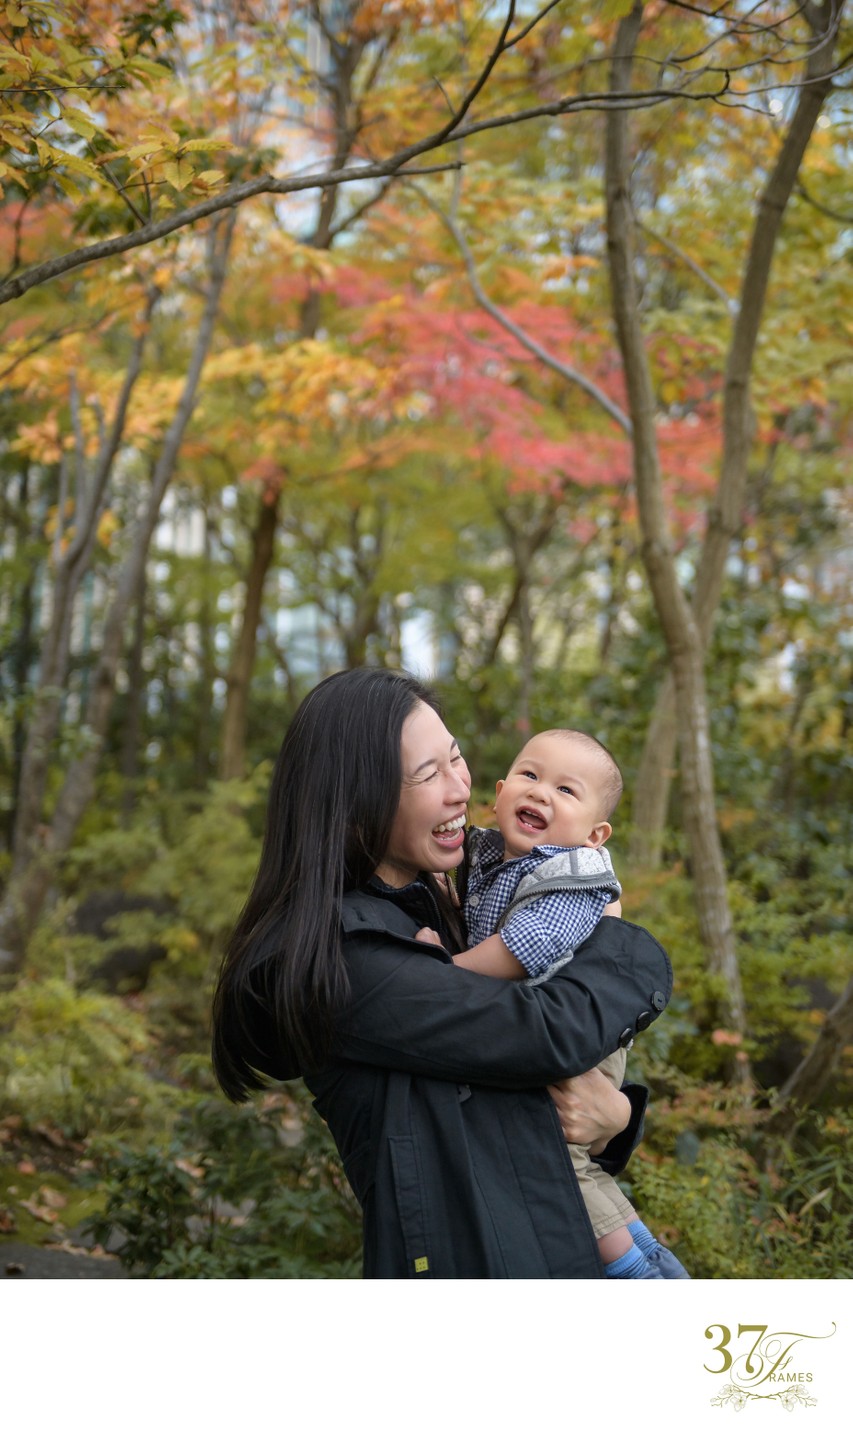 Fun and giggles | Family Photos in Fall in Tokyo